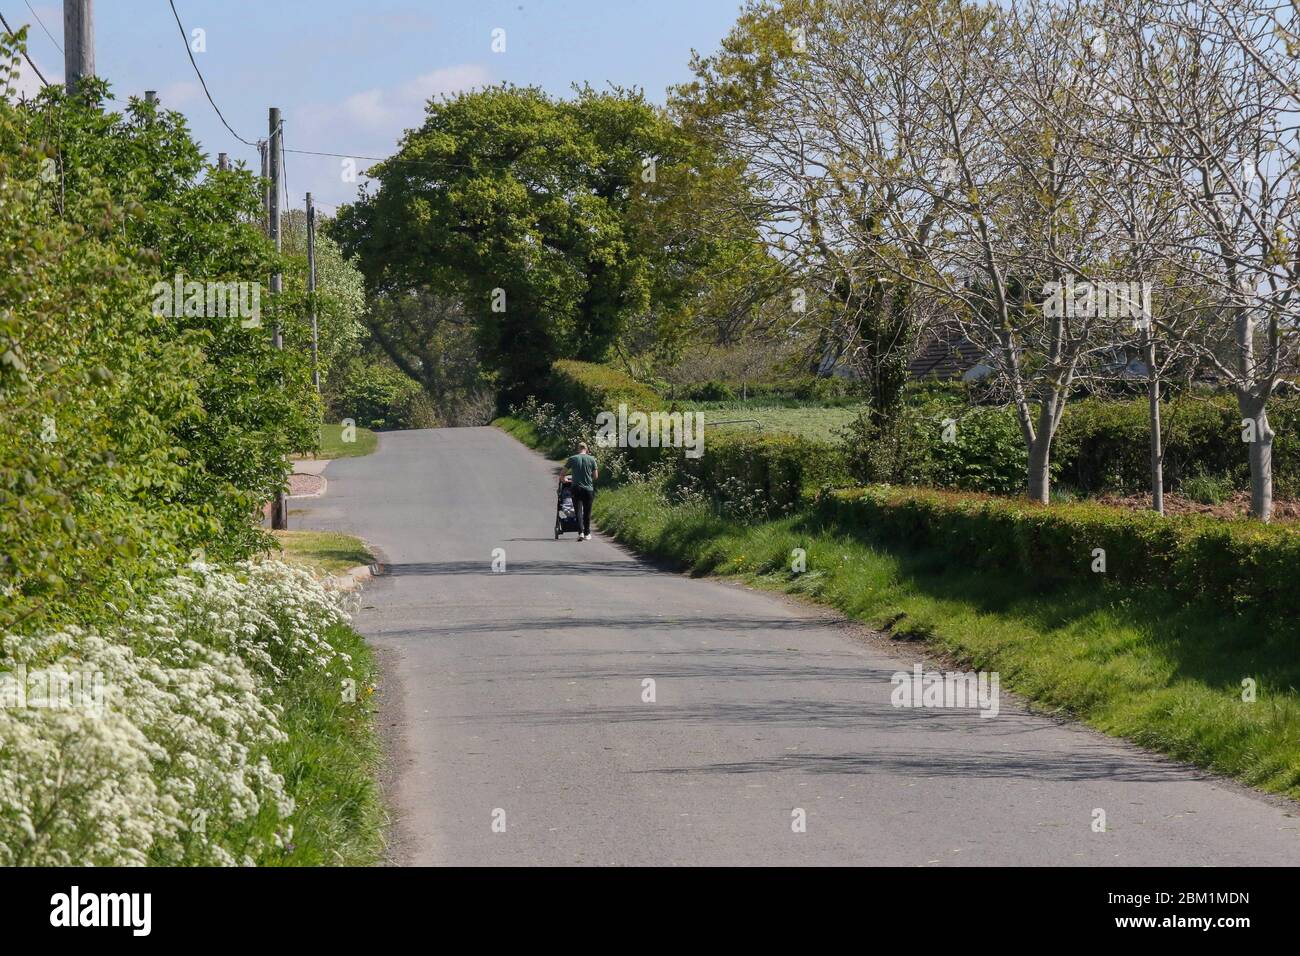 Magheralin, County Armagh, Northern Ireland. 06 May 2020. UK weather - bright blue sky and sunshine today as the execptional spell of dry spring weather continues. There will be some rain overnight before dry and cooler weather returns over the weekend. Man taking young child in pram along a country road. Credit: CAZIMB/Alamy Live News. Stock Photo